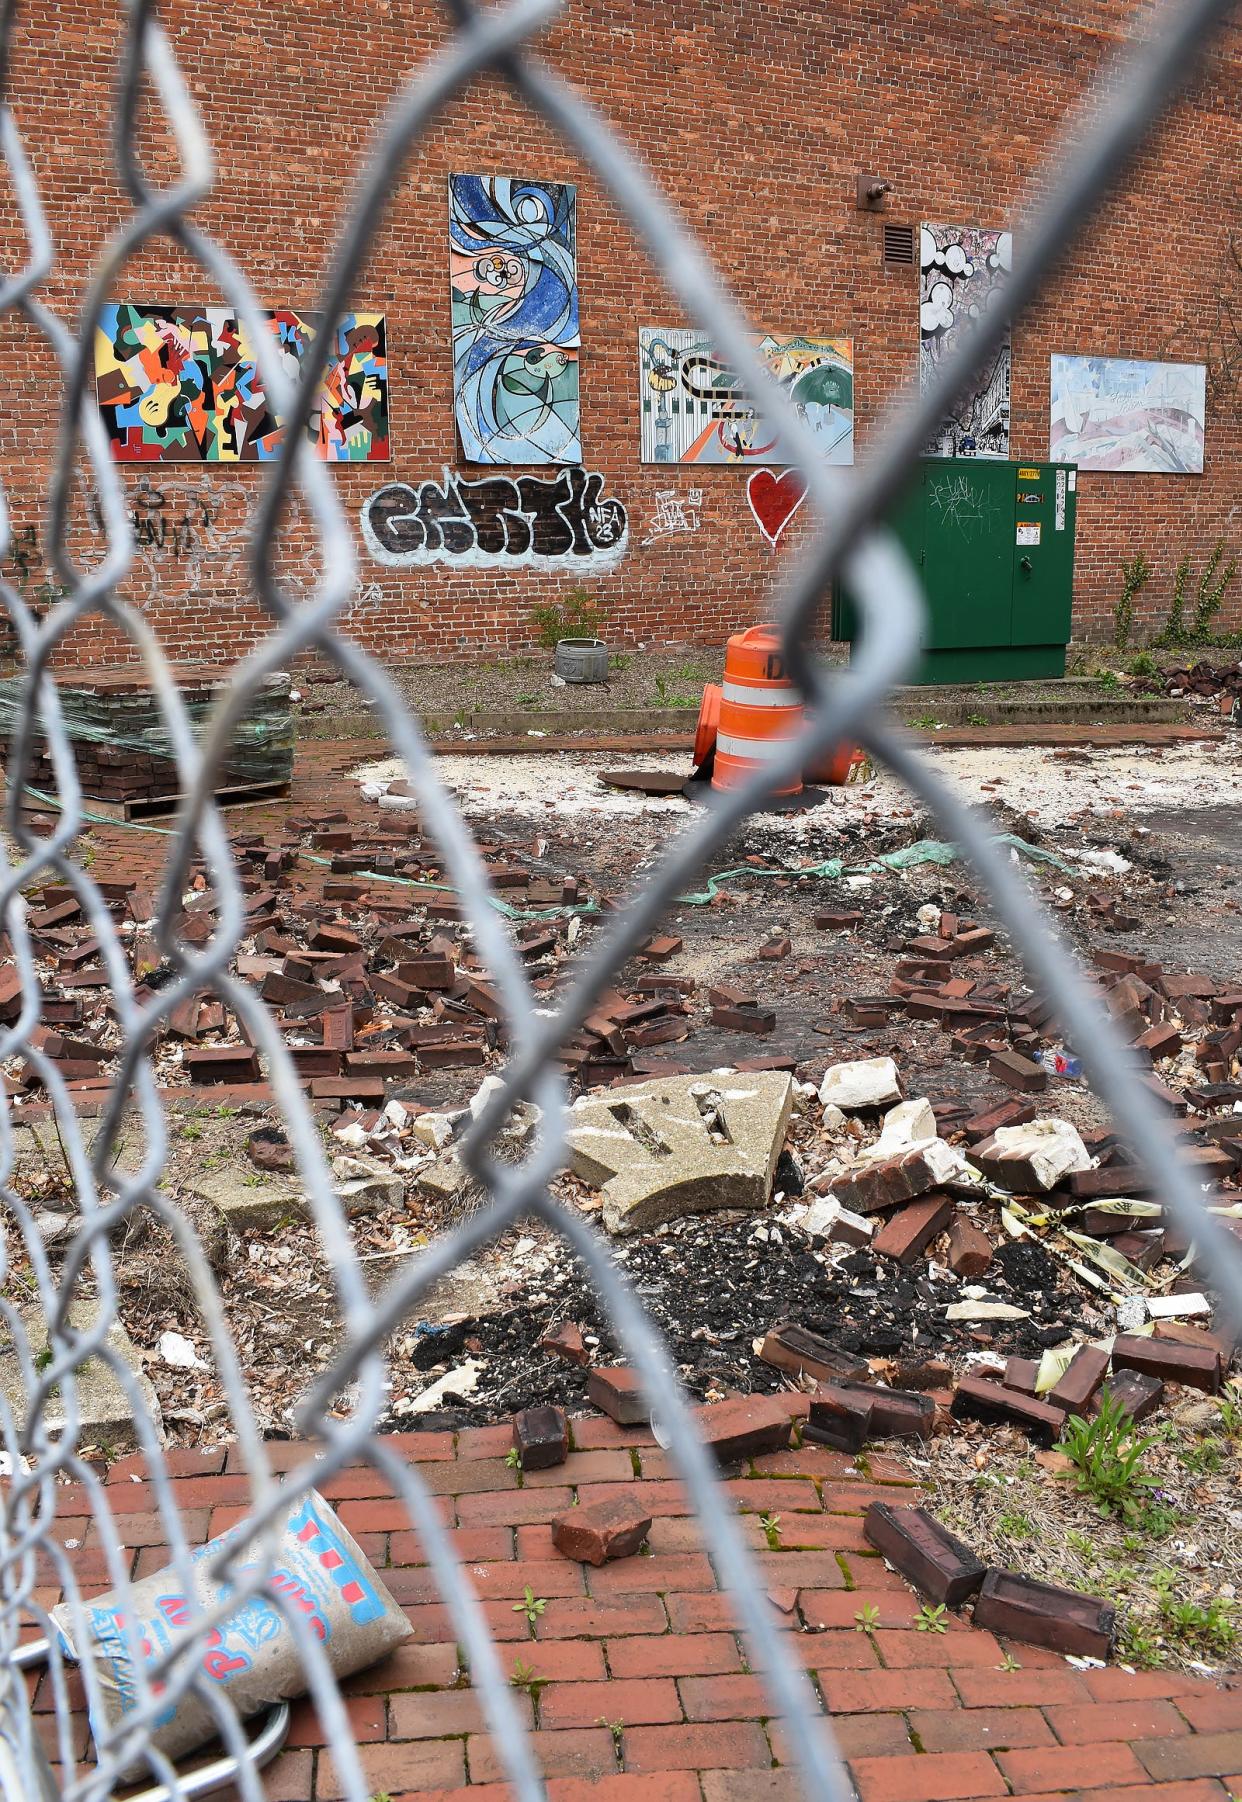 The Jerry Lawton Memorial Plaza pocket park has been a fenced-in eyesore on South Main Street for years.